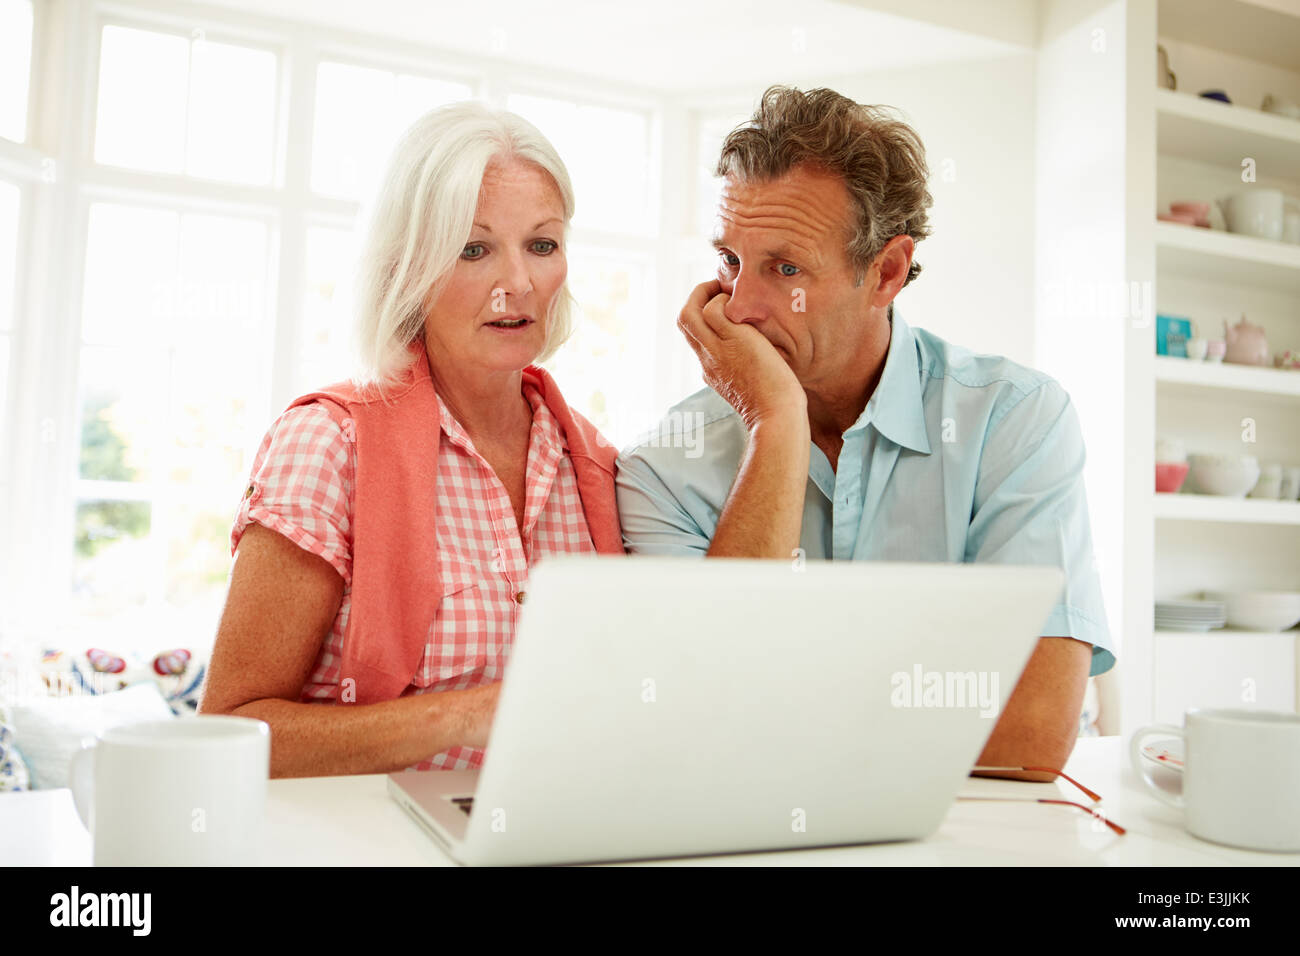 Worried Middle Aged Couple Looking At Laptop Stock Photo